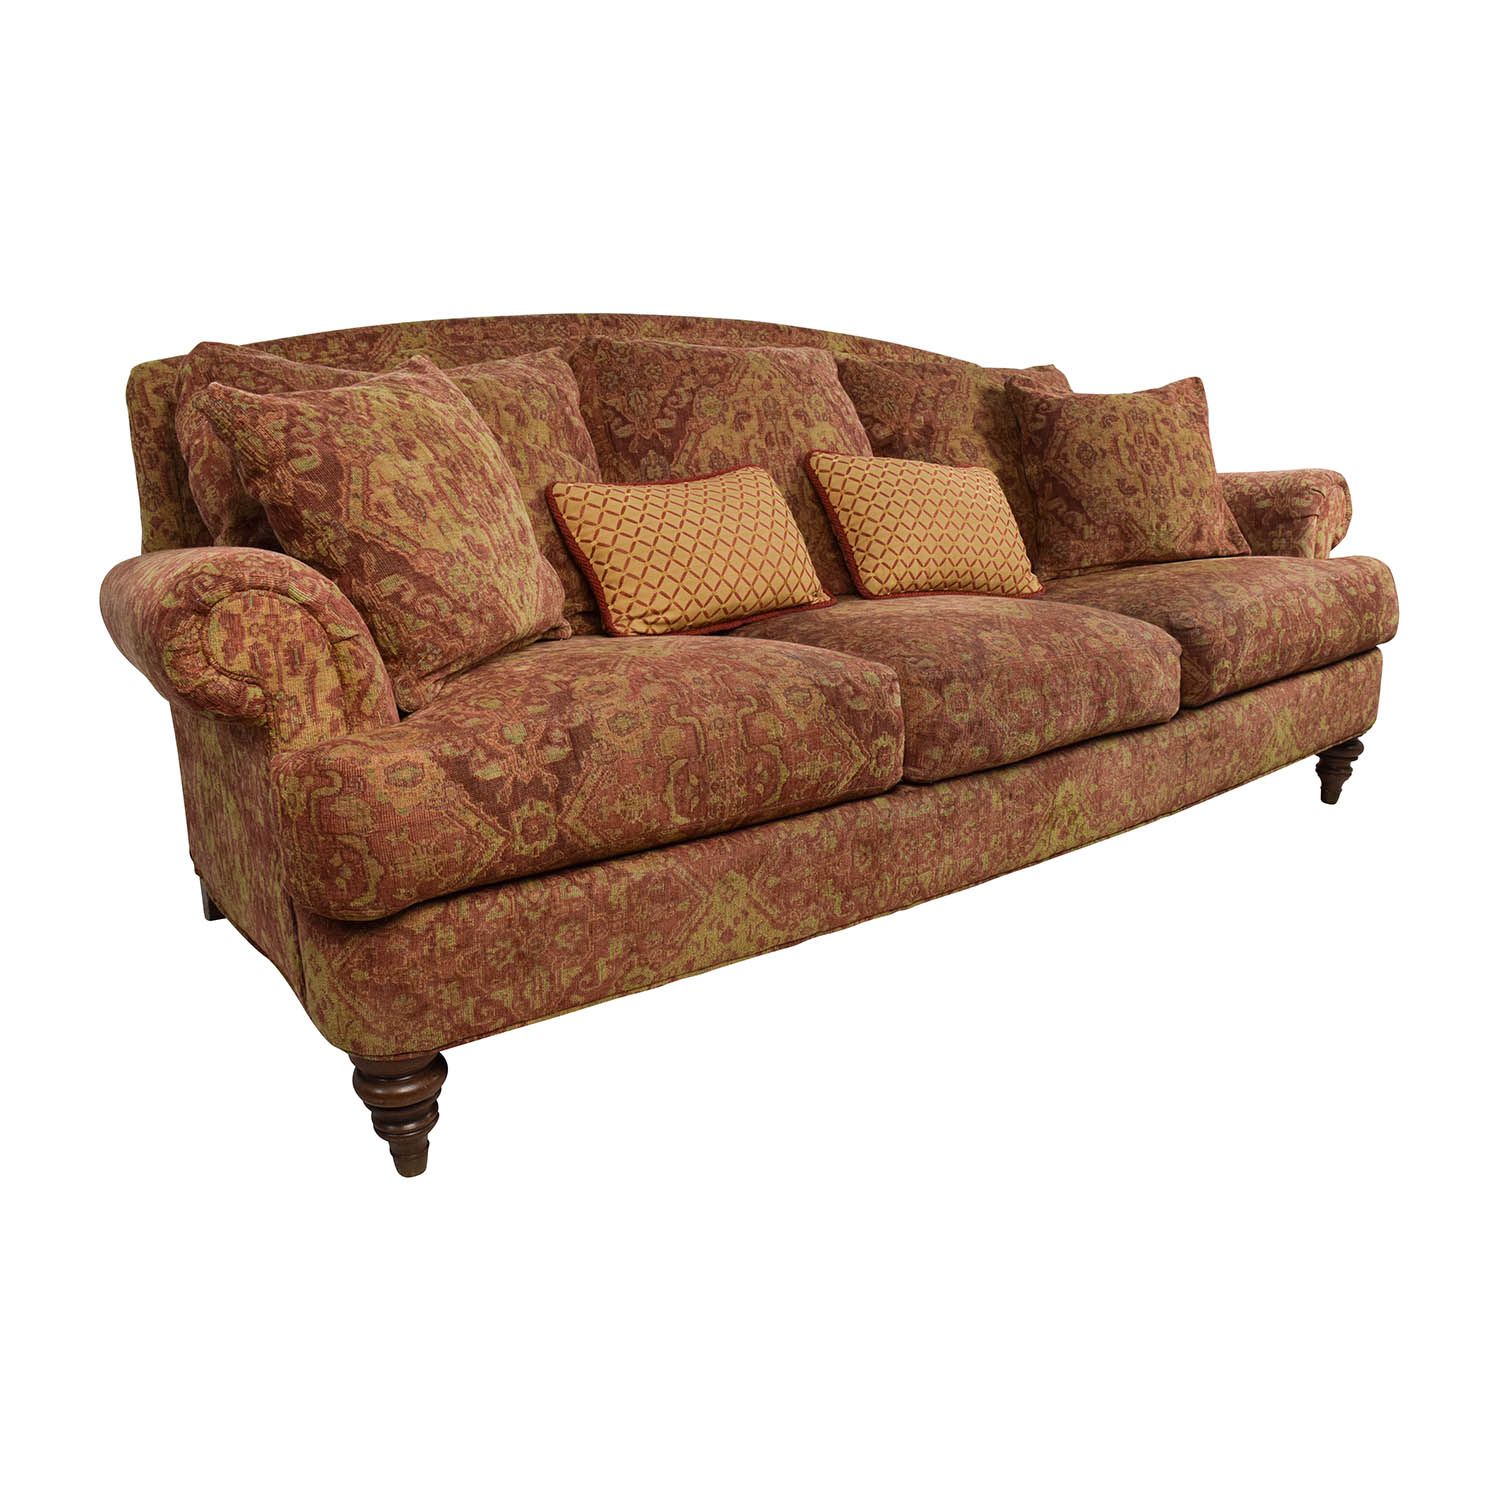 65% Off – Ethan Allen Ethan Allen Paisley Cushioned Sofa Inside Ethan Allen Sofas And Chairs (View 1 of 15)